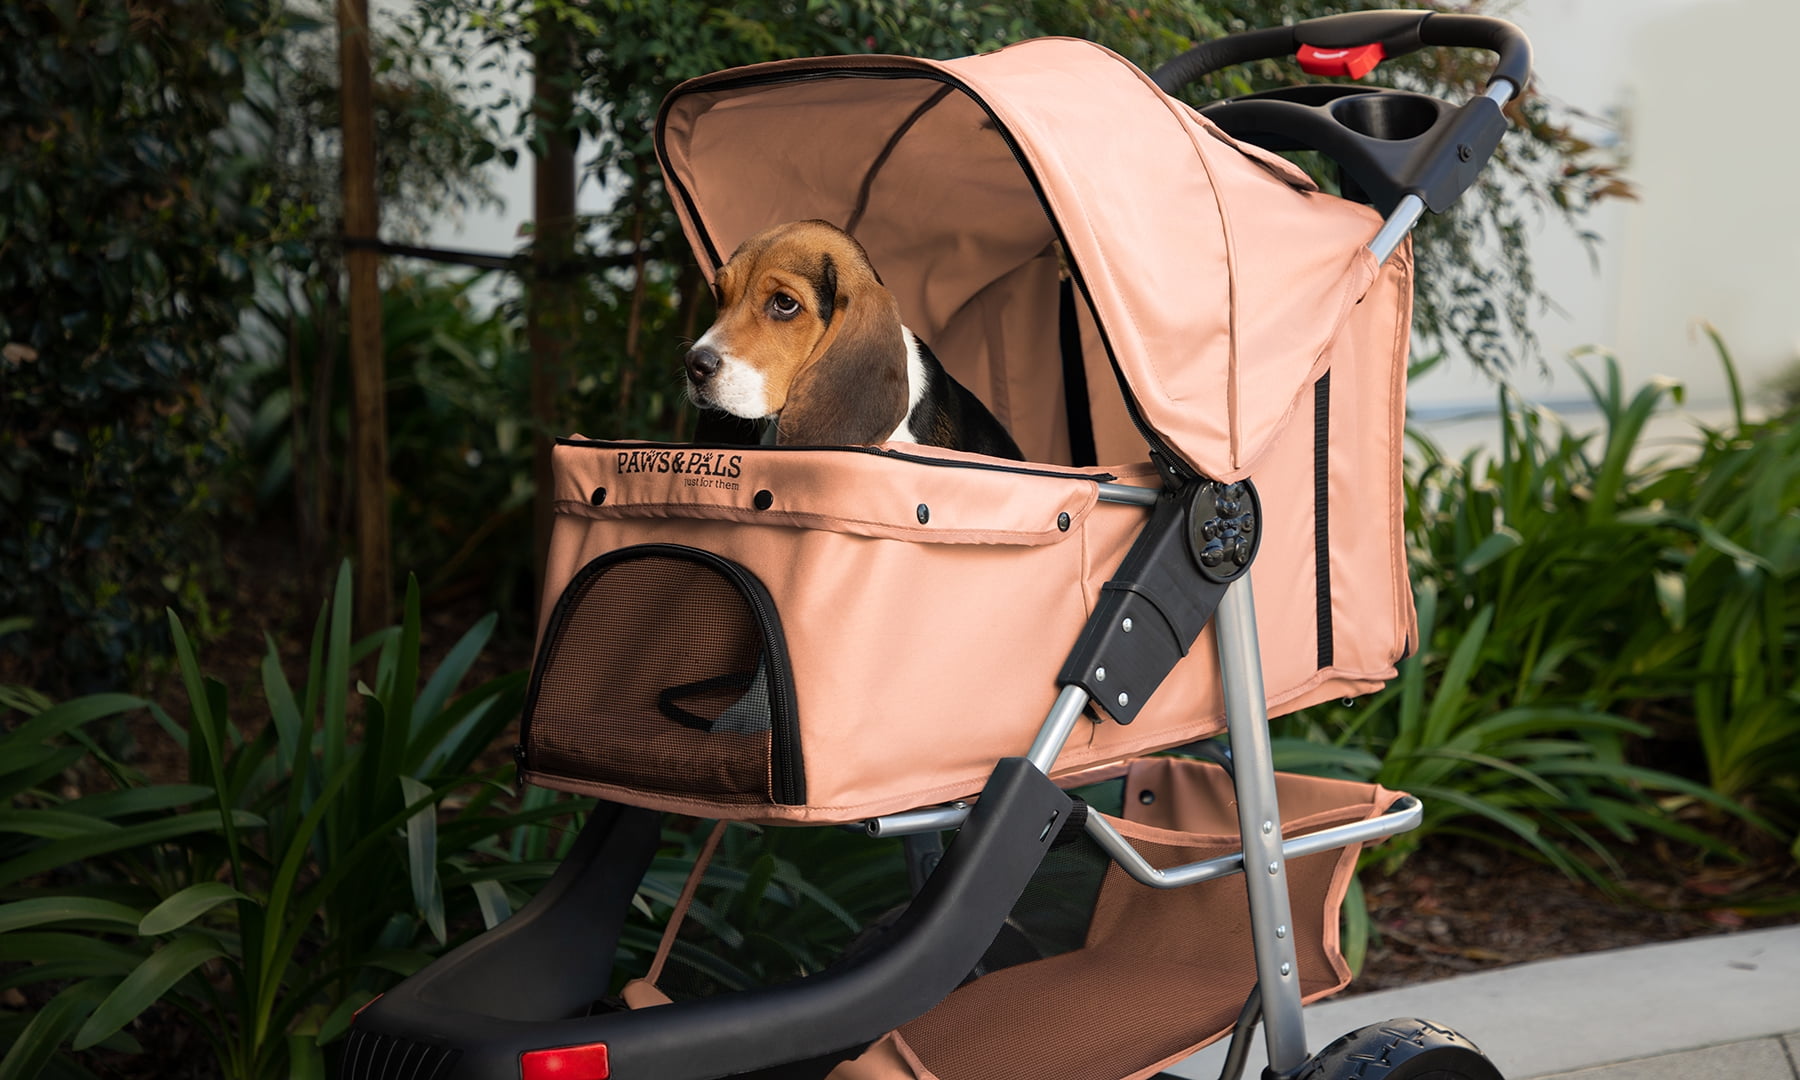 paws and pals deluxe stroller